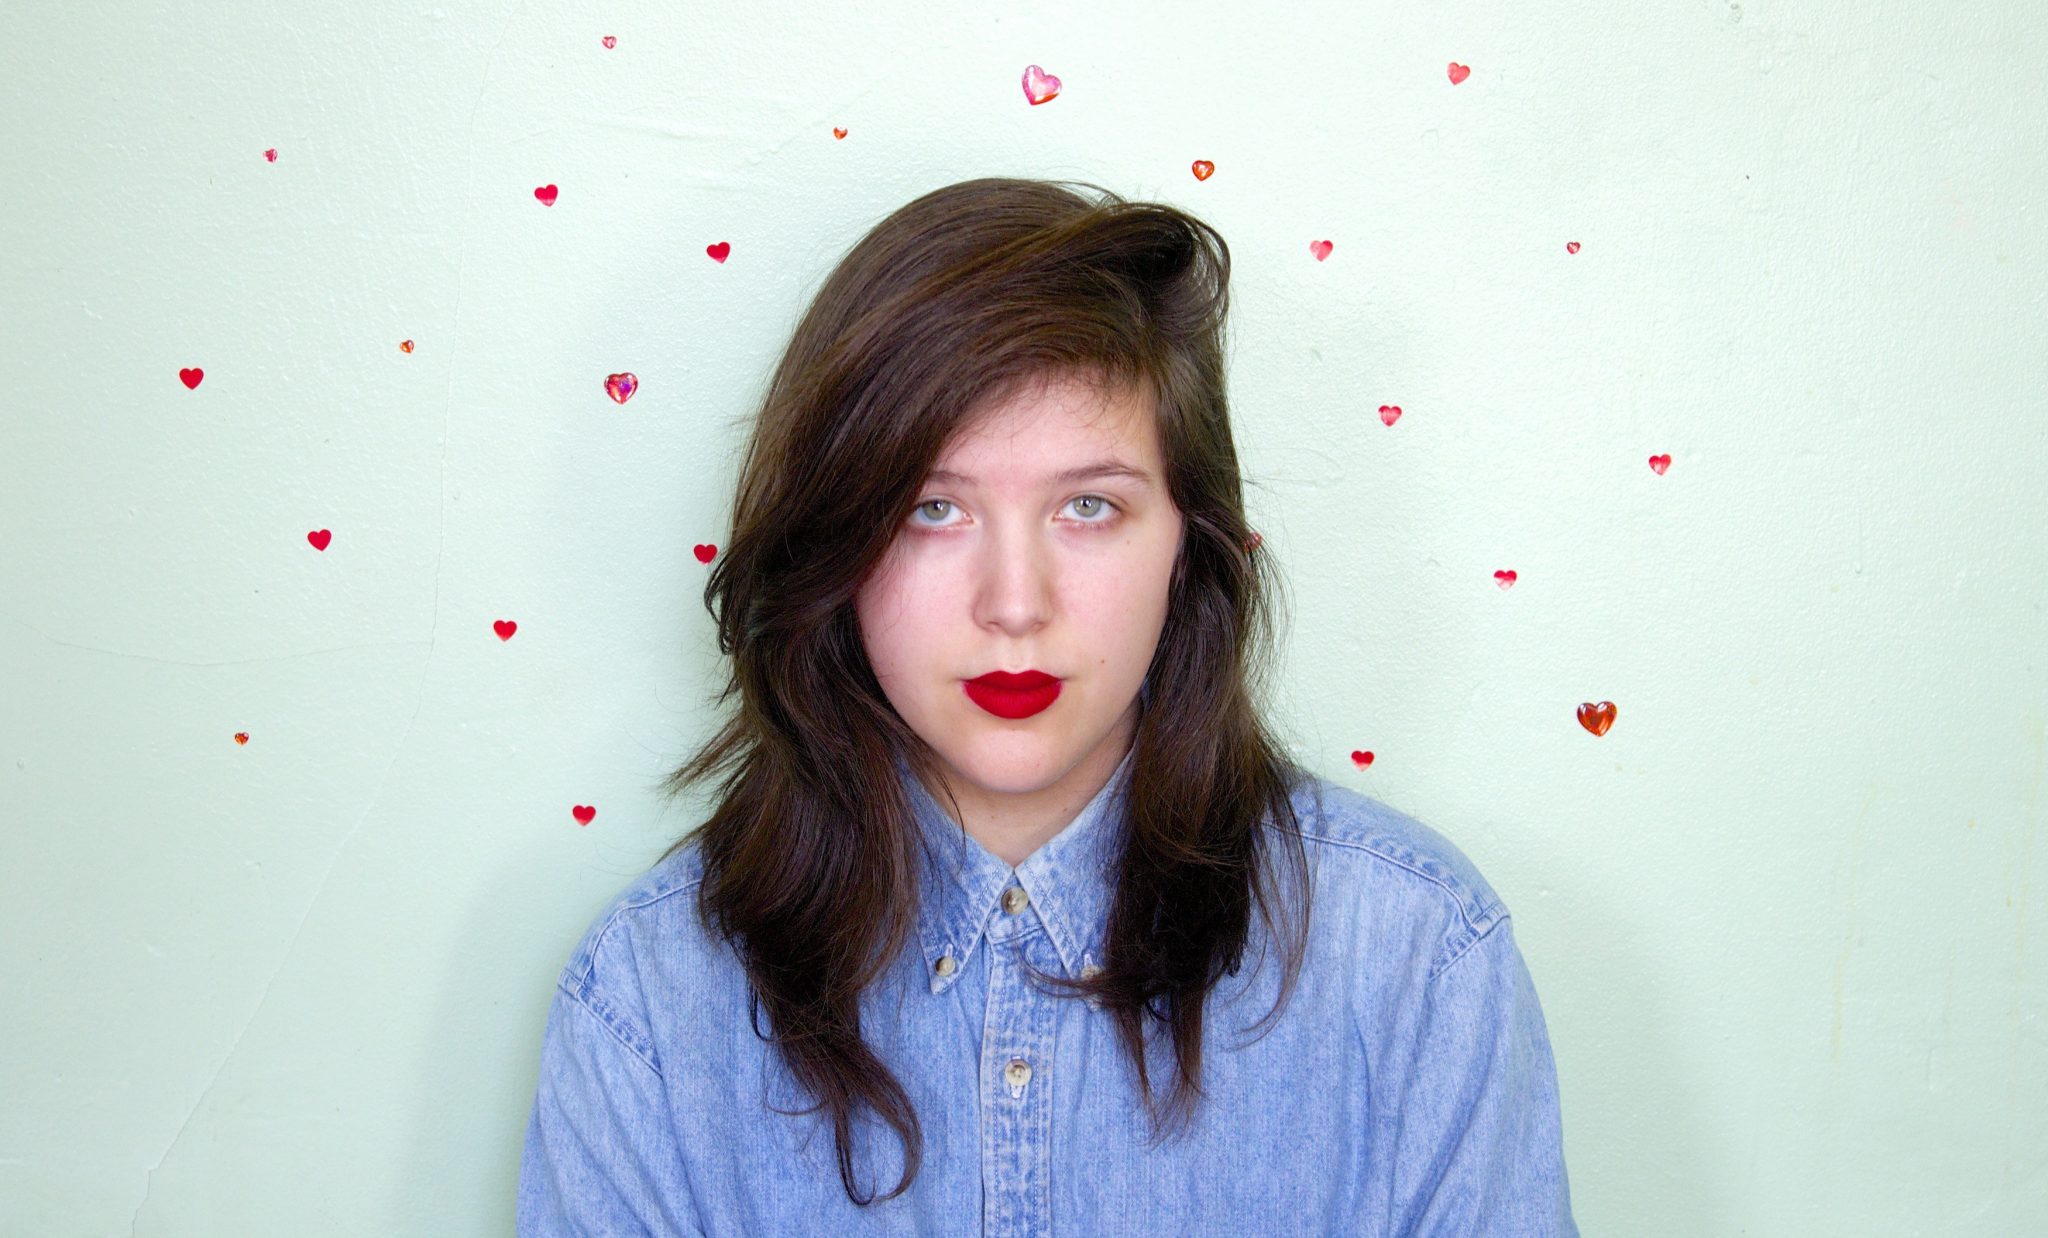 lucy dacus / night shift 